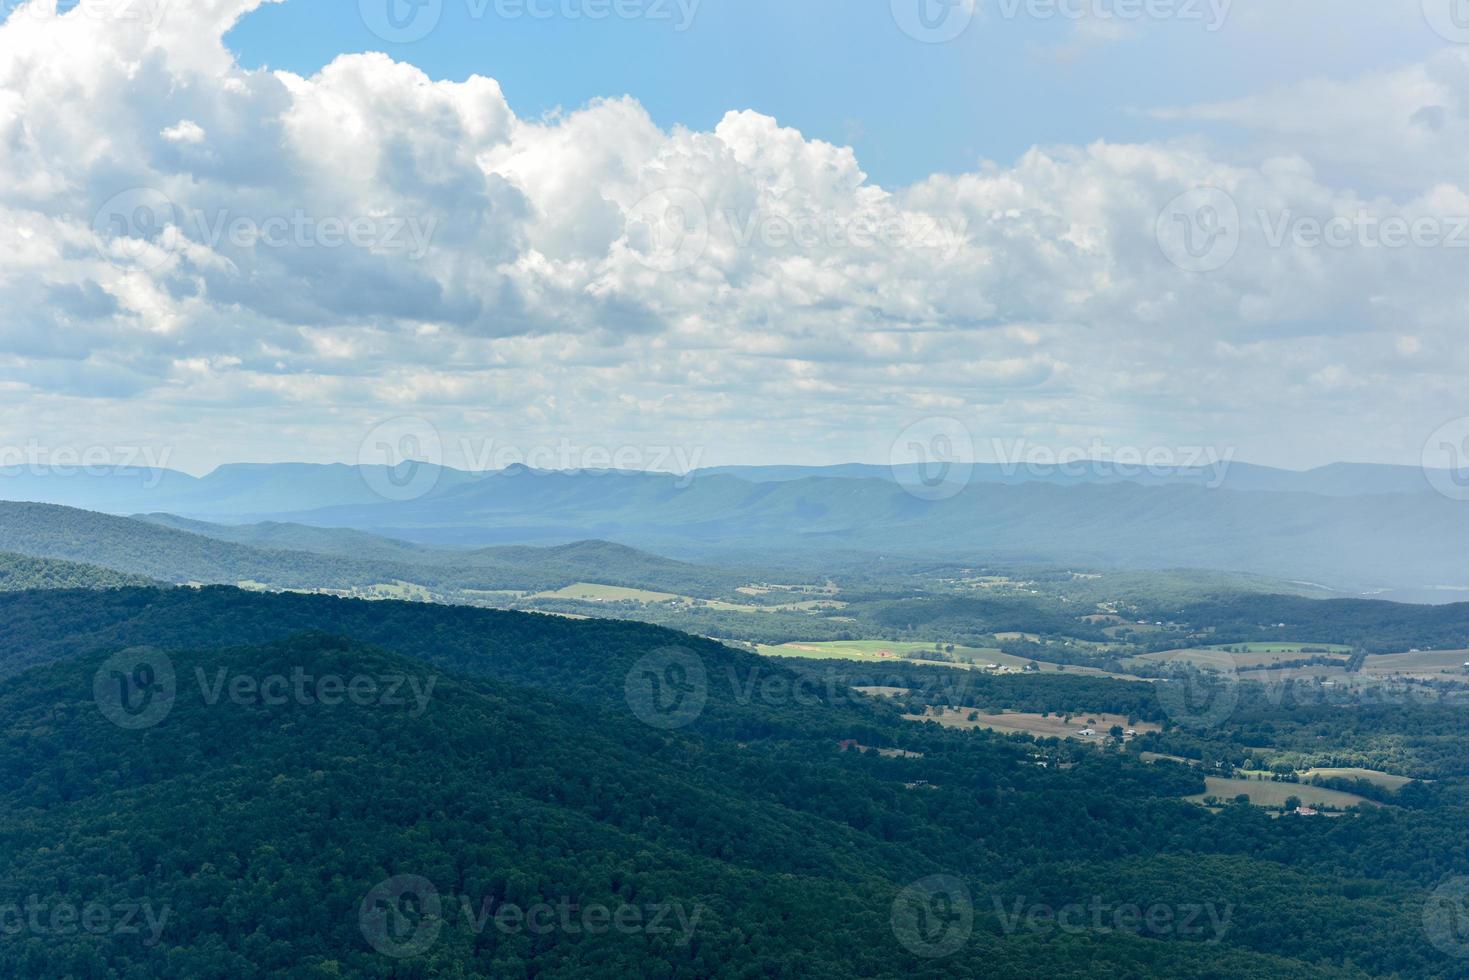 View of the Shenandoah Valley and Blue Ridge Mountains from Shenandoah National Park, Virginia photo